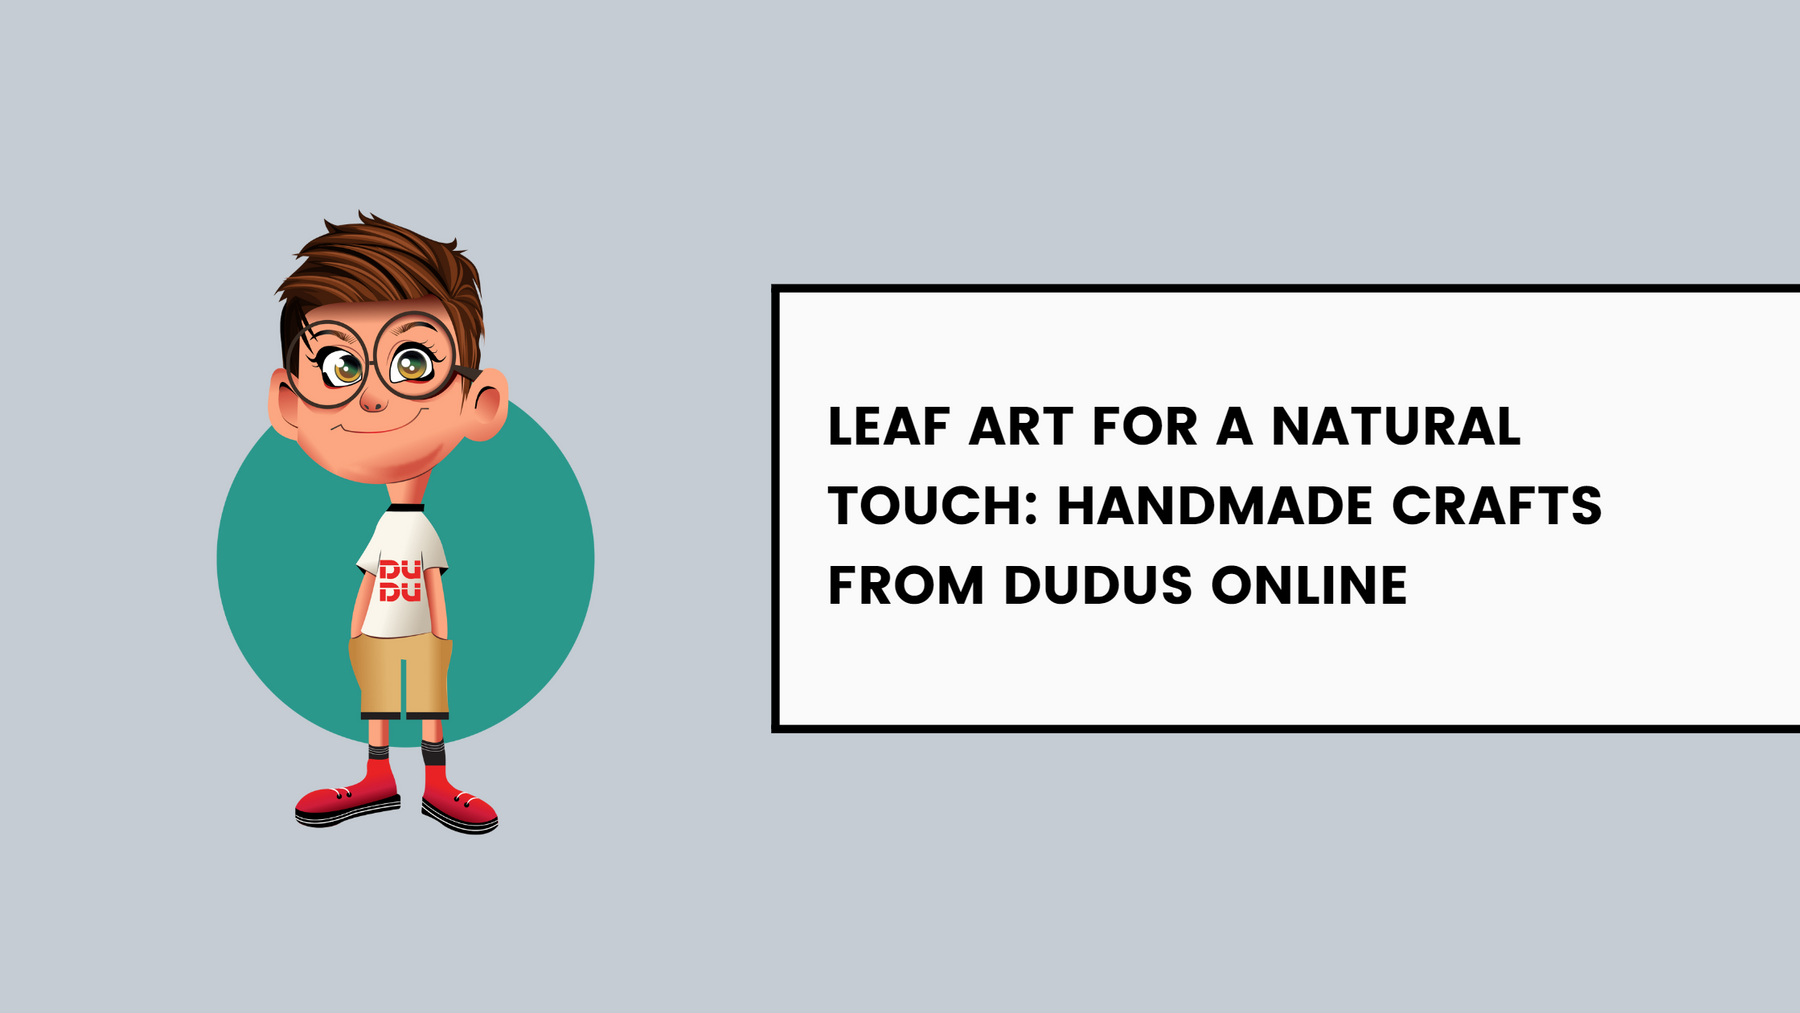 Leaf Art For A Natural Touch: Handmade Crafts From Dudus Online